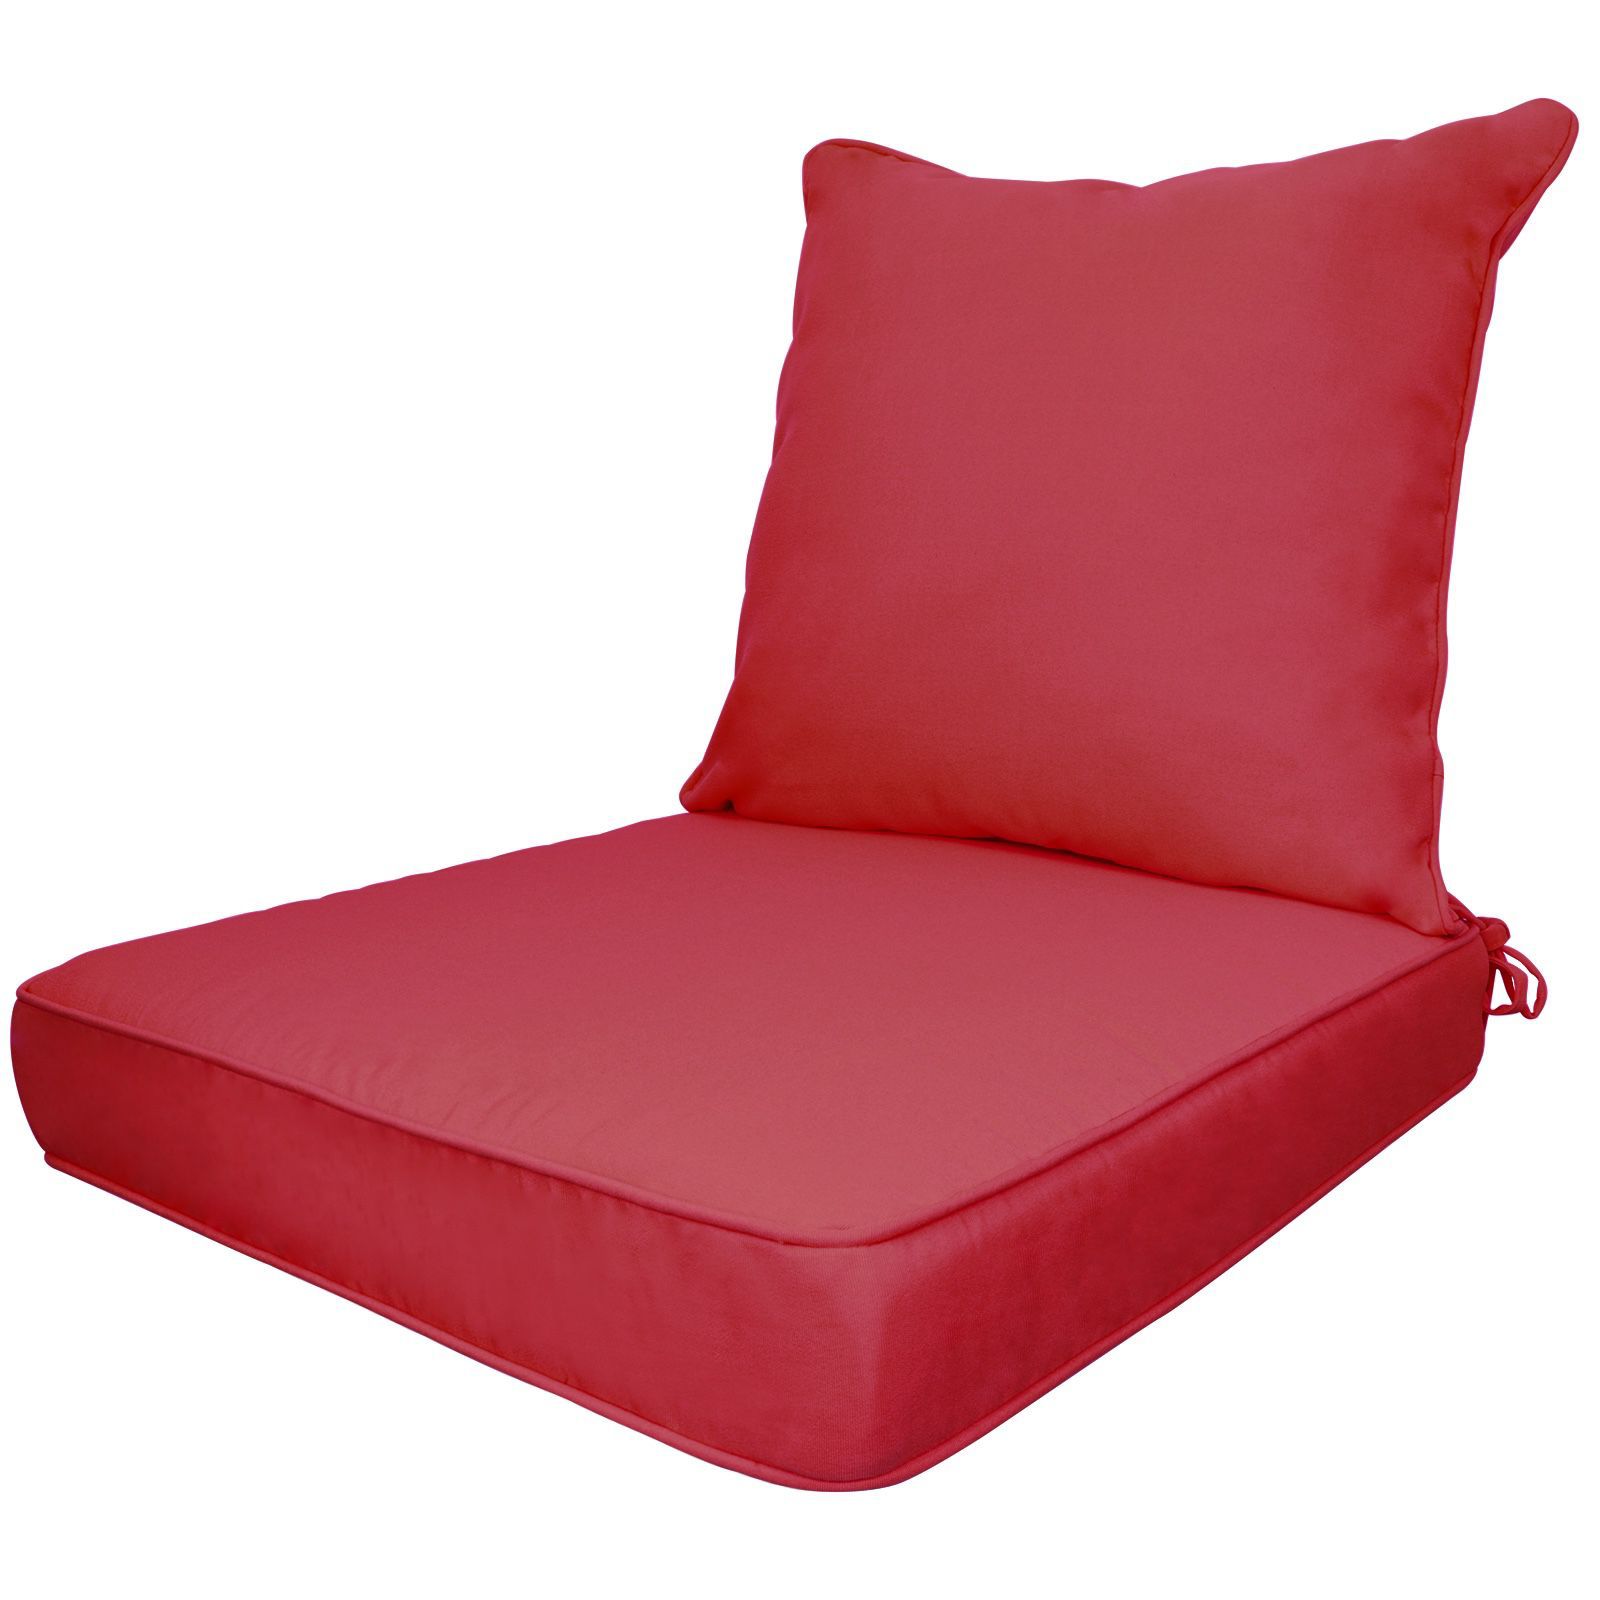 Outdoor Cushions  Brand New- Four Colors Avail.